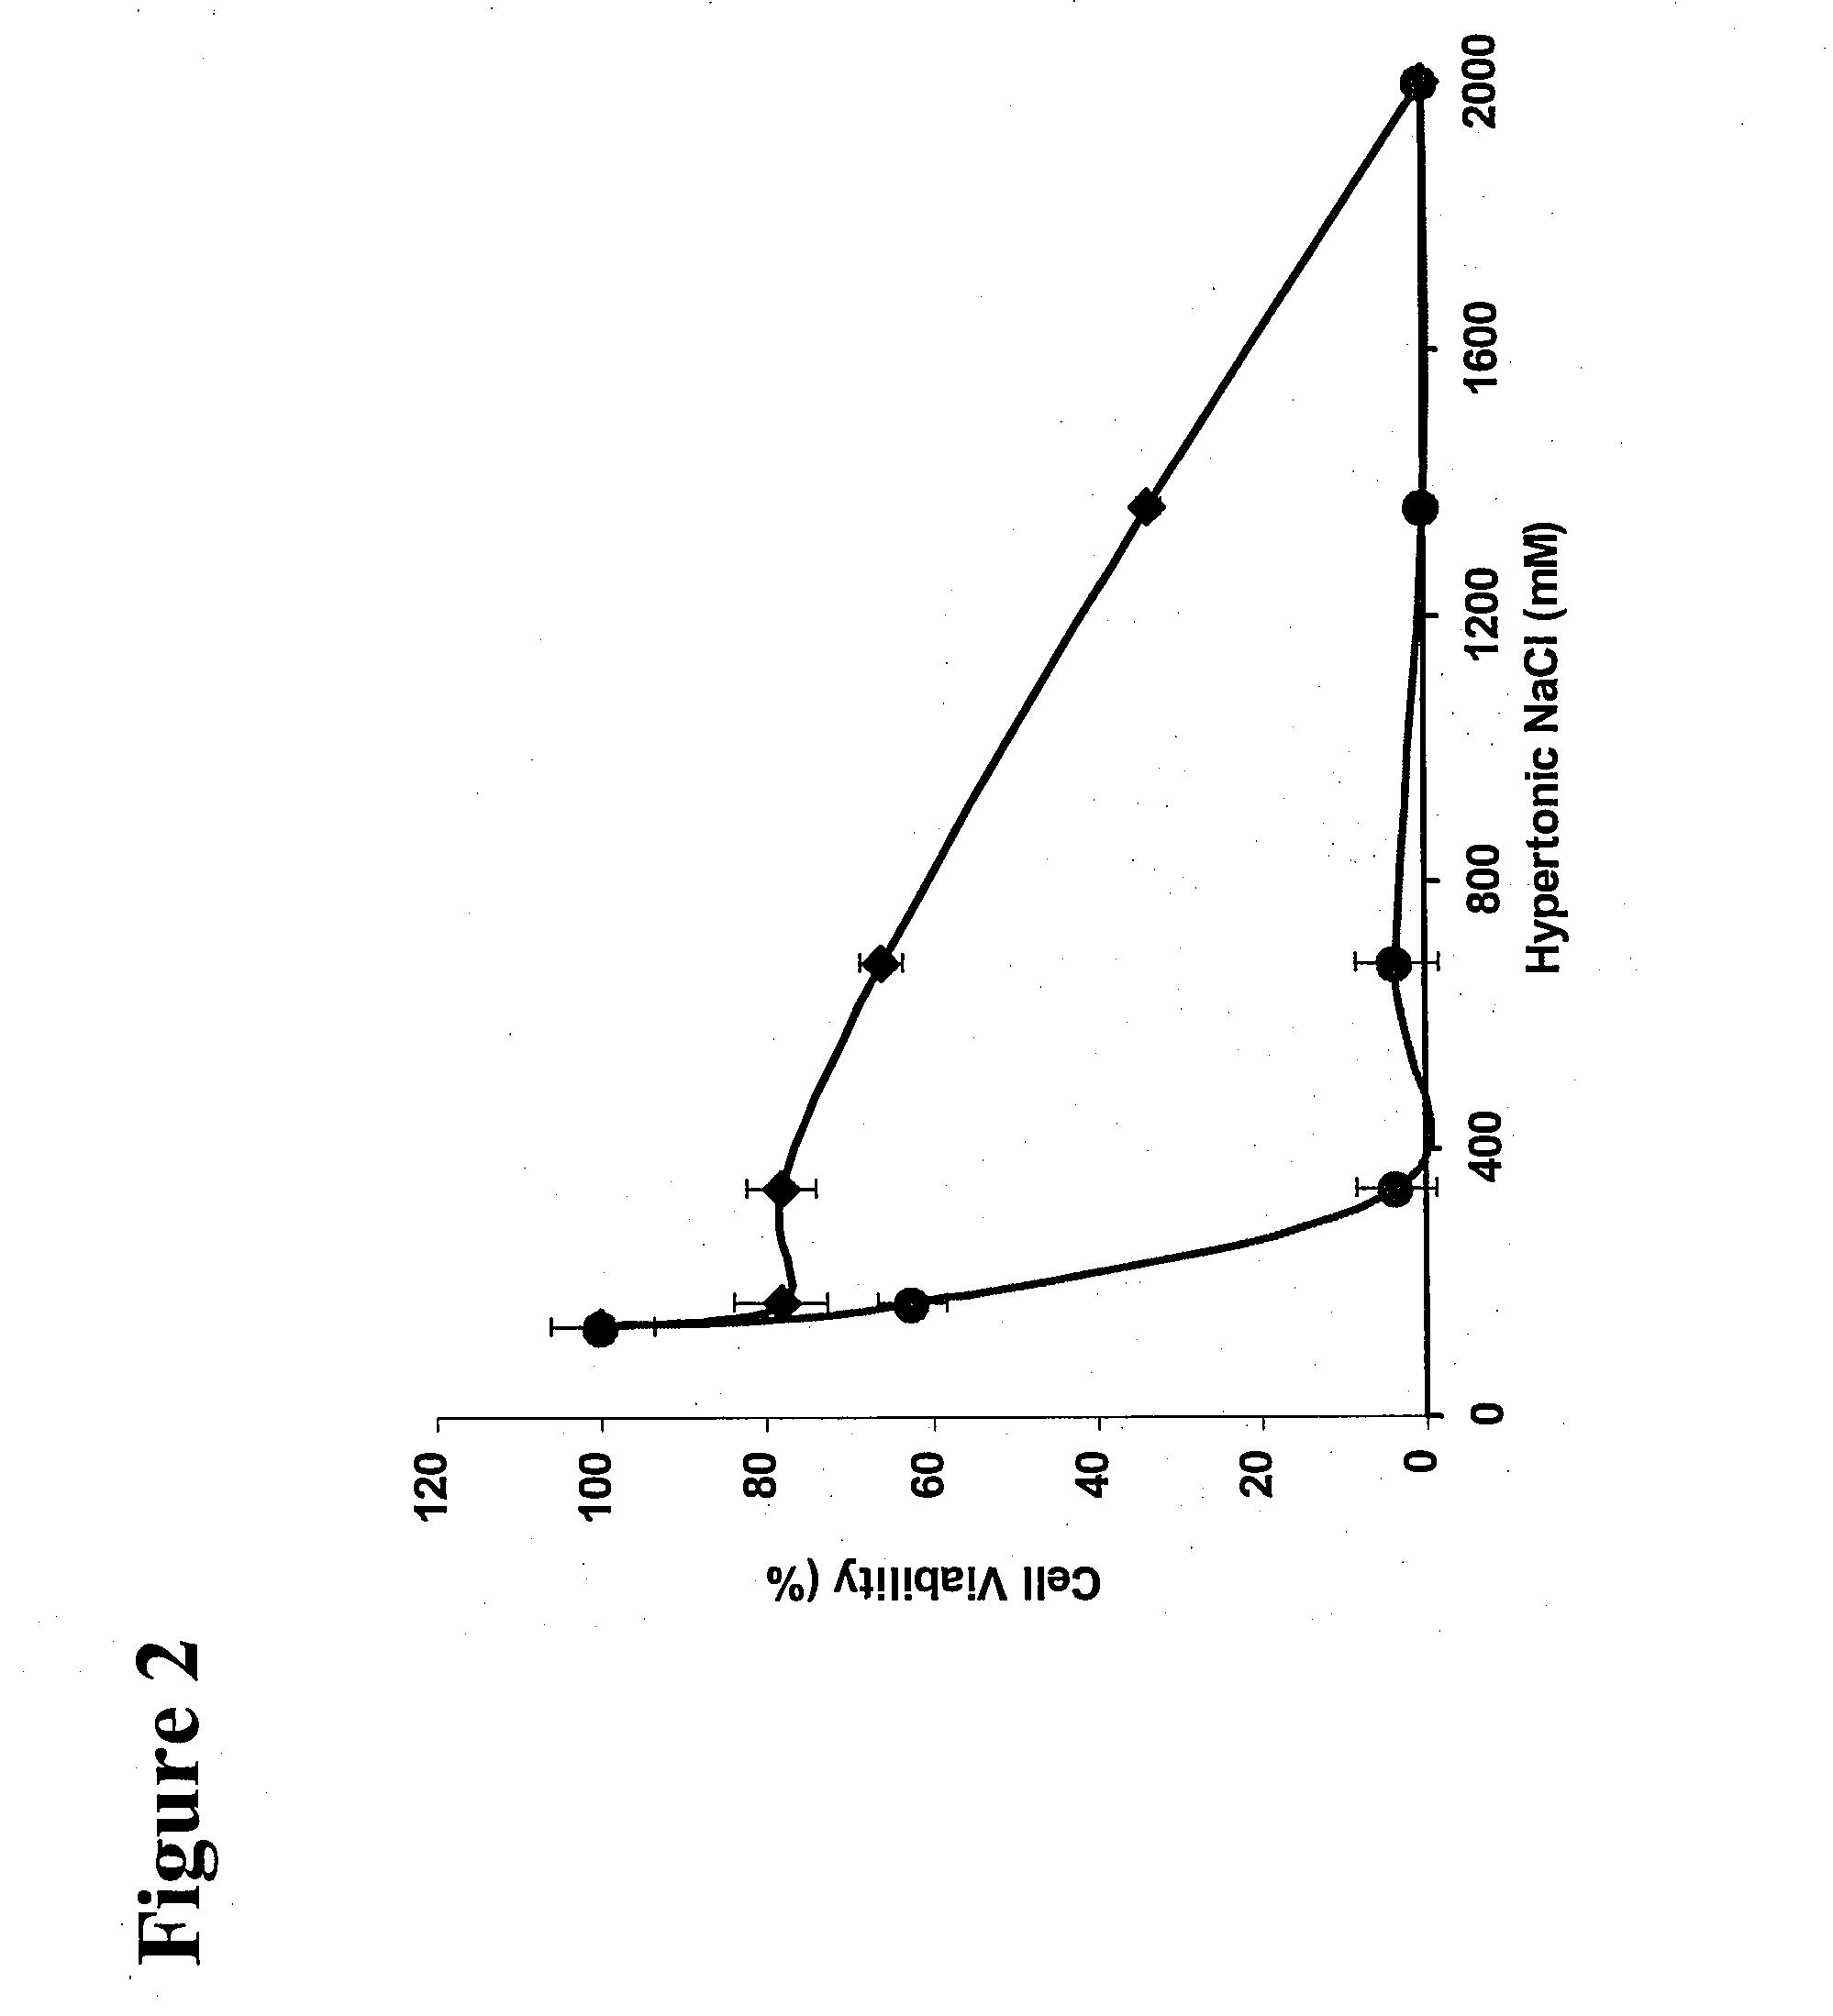 Treatment Solution and Method for Preventing Posterior Capsular Opacification by Selectively Inducing Detachment And/Or Death of Lens Epithelial Cells